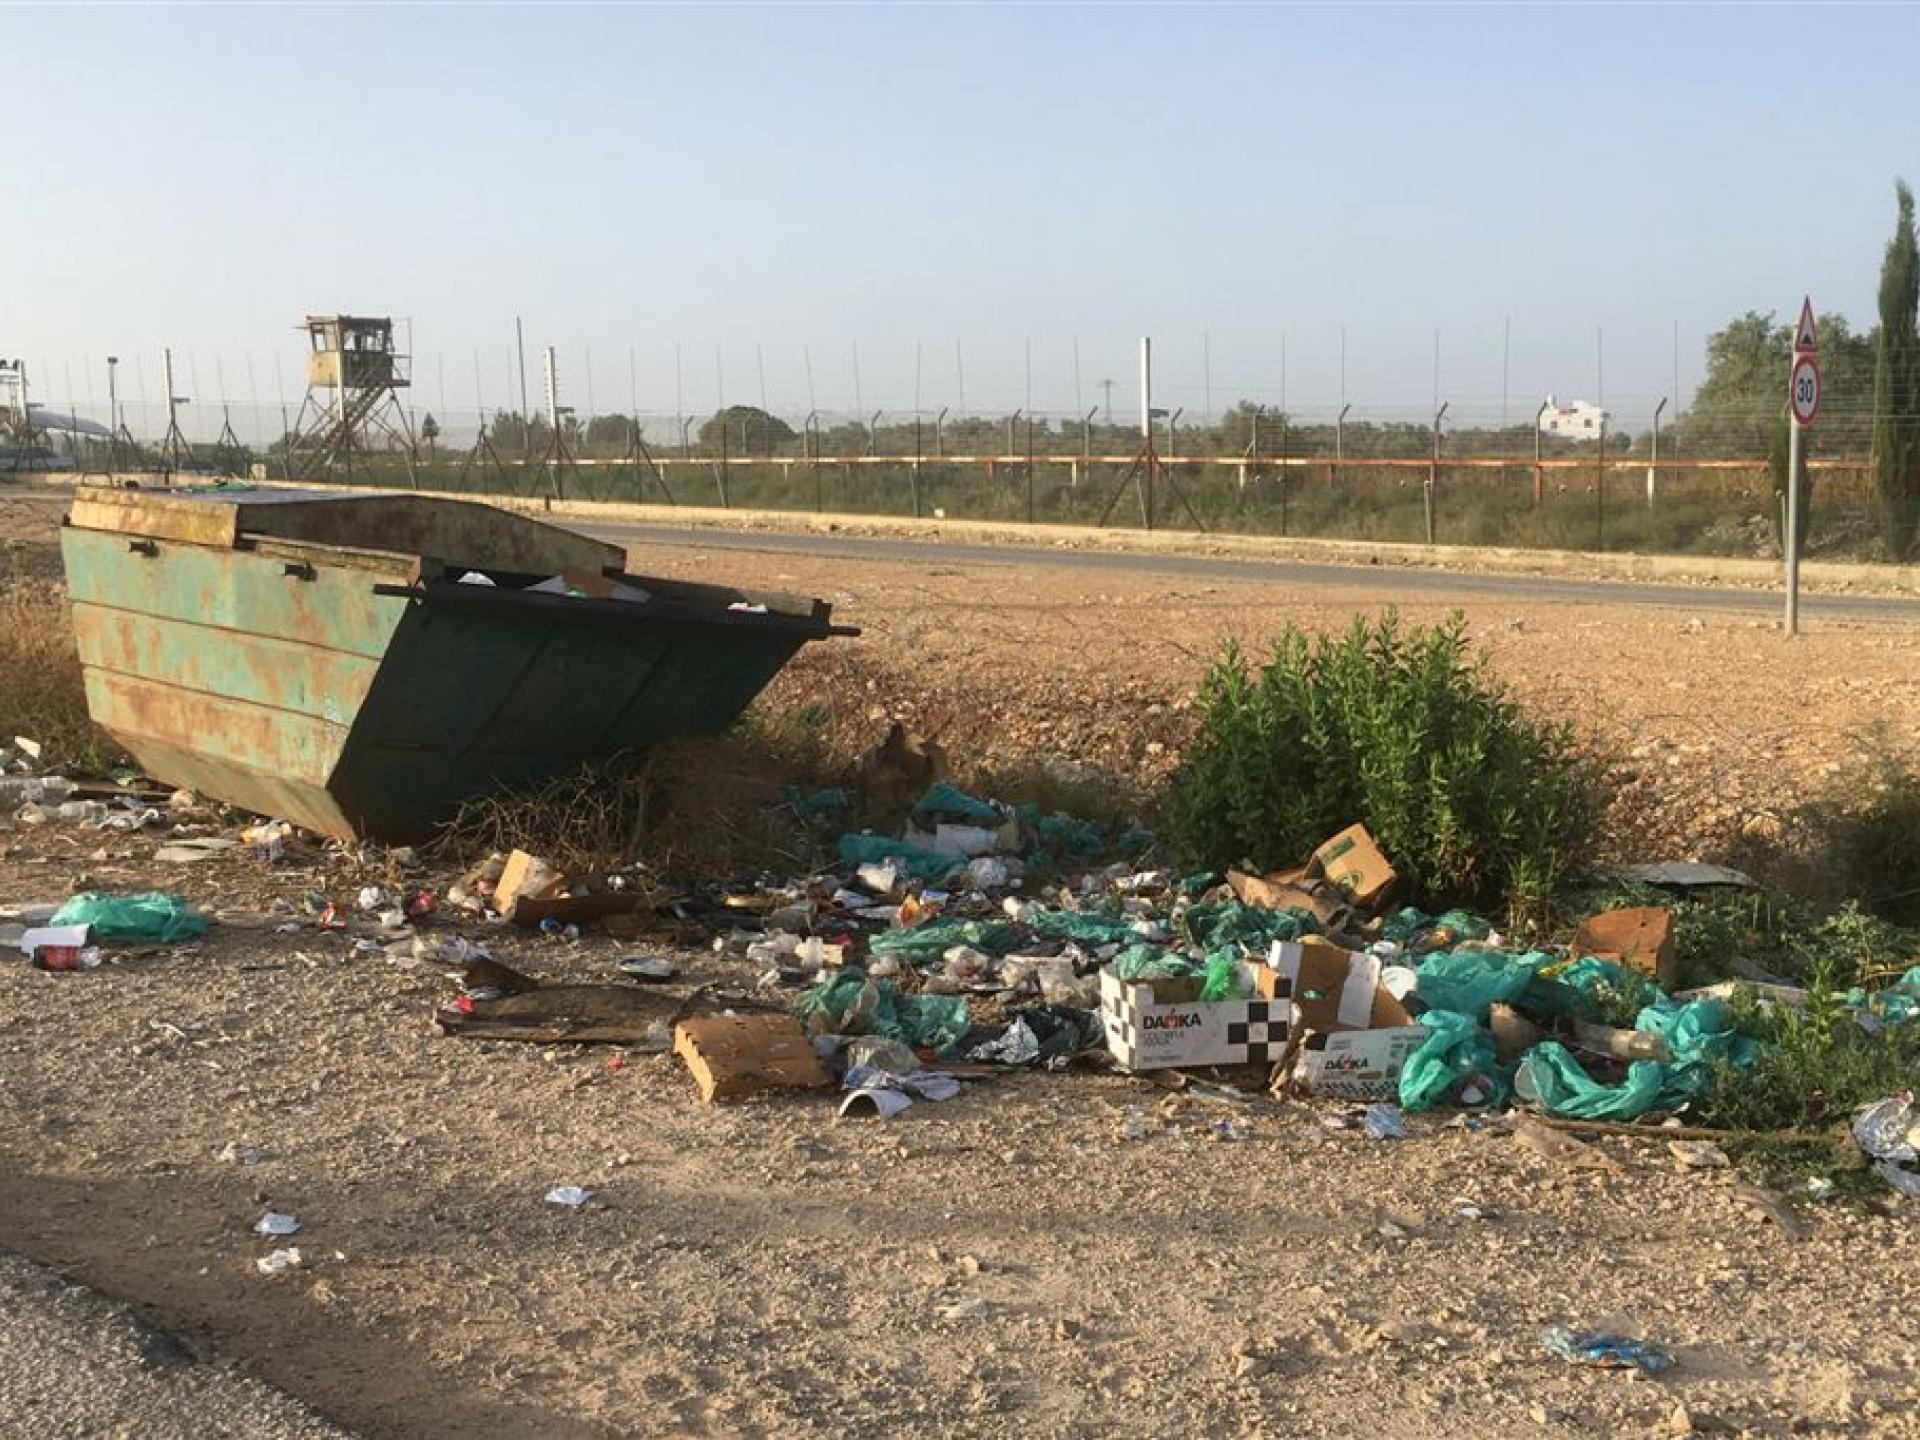 Tura-Shaked Checkpoint – The army's garbage scattered around